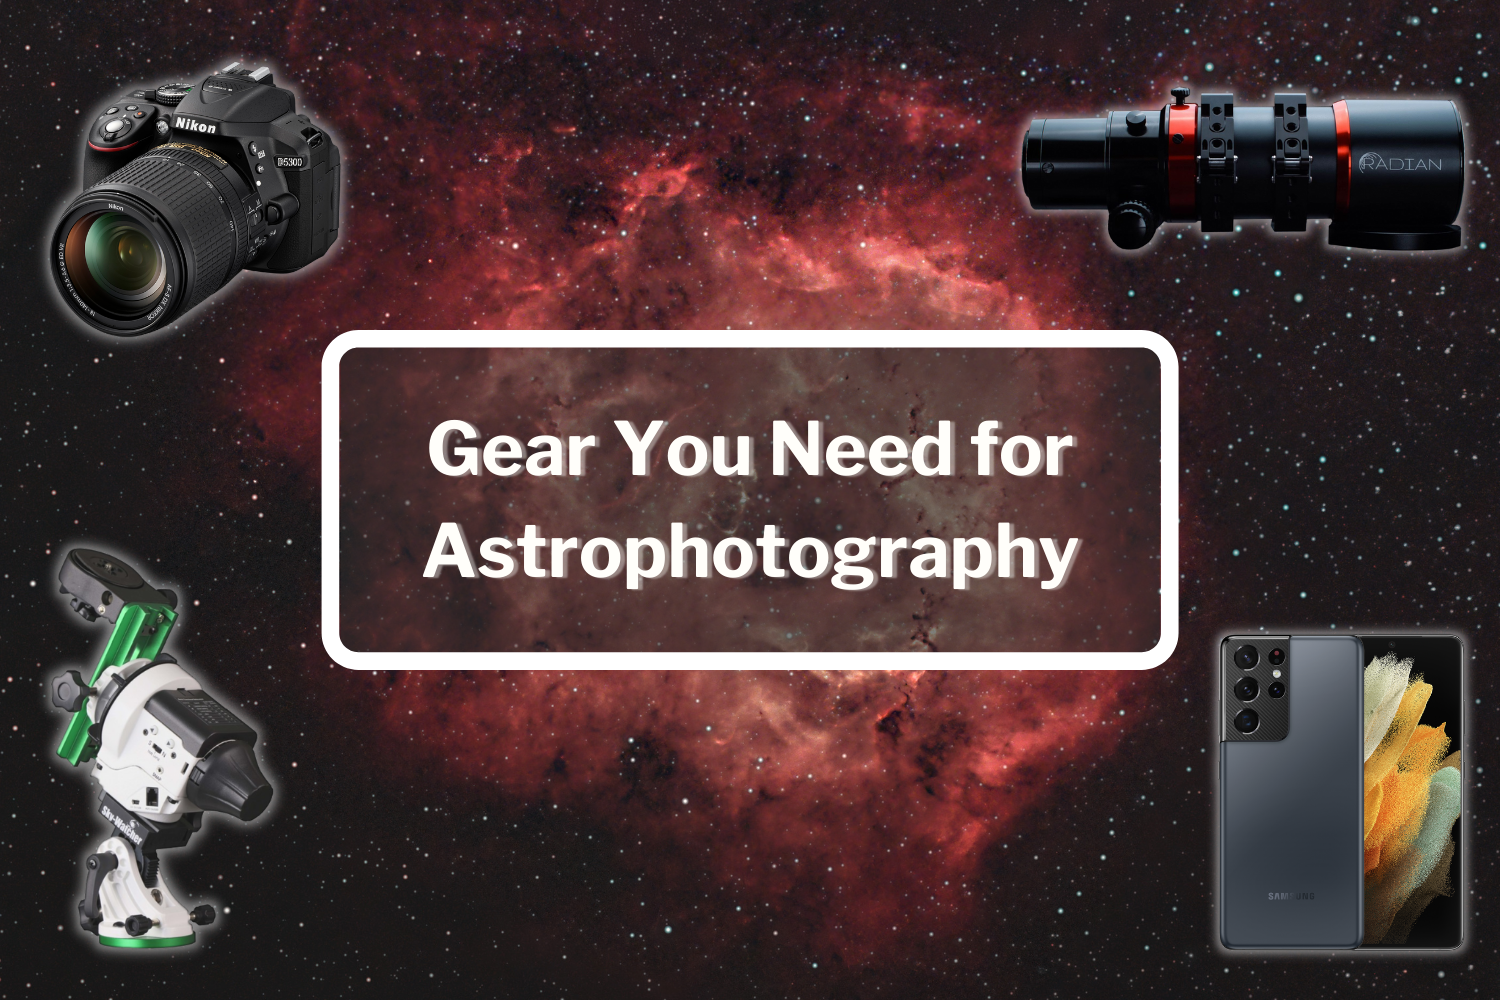 Gear You Need For Astrophotography